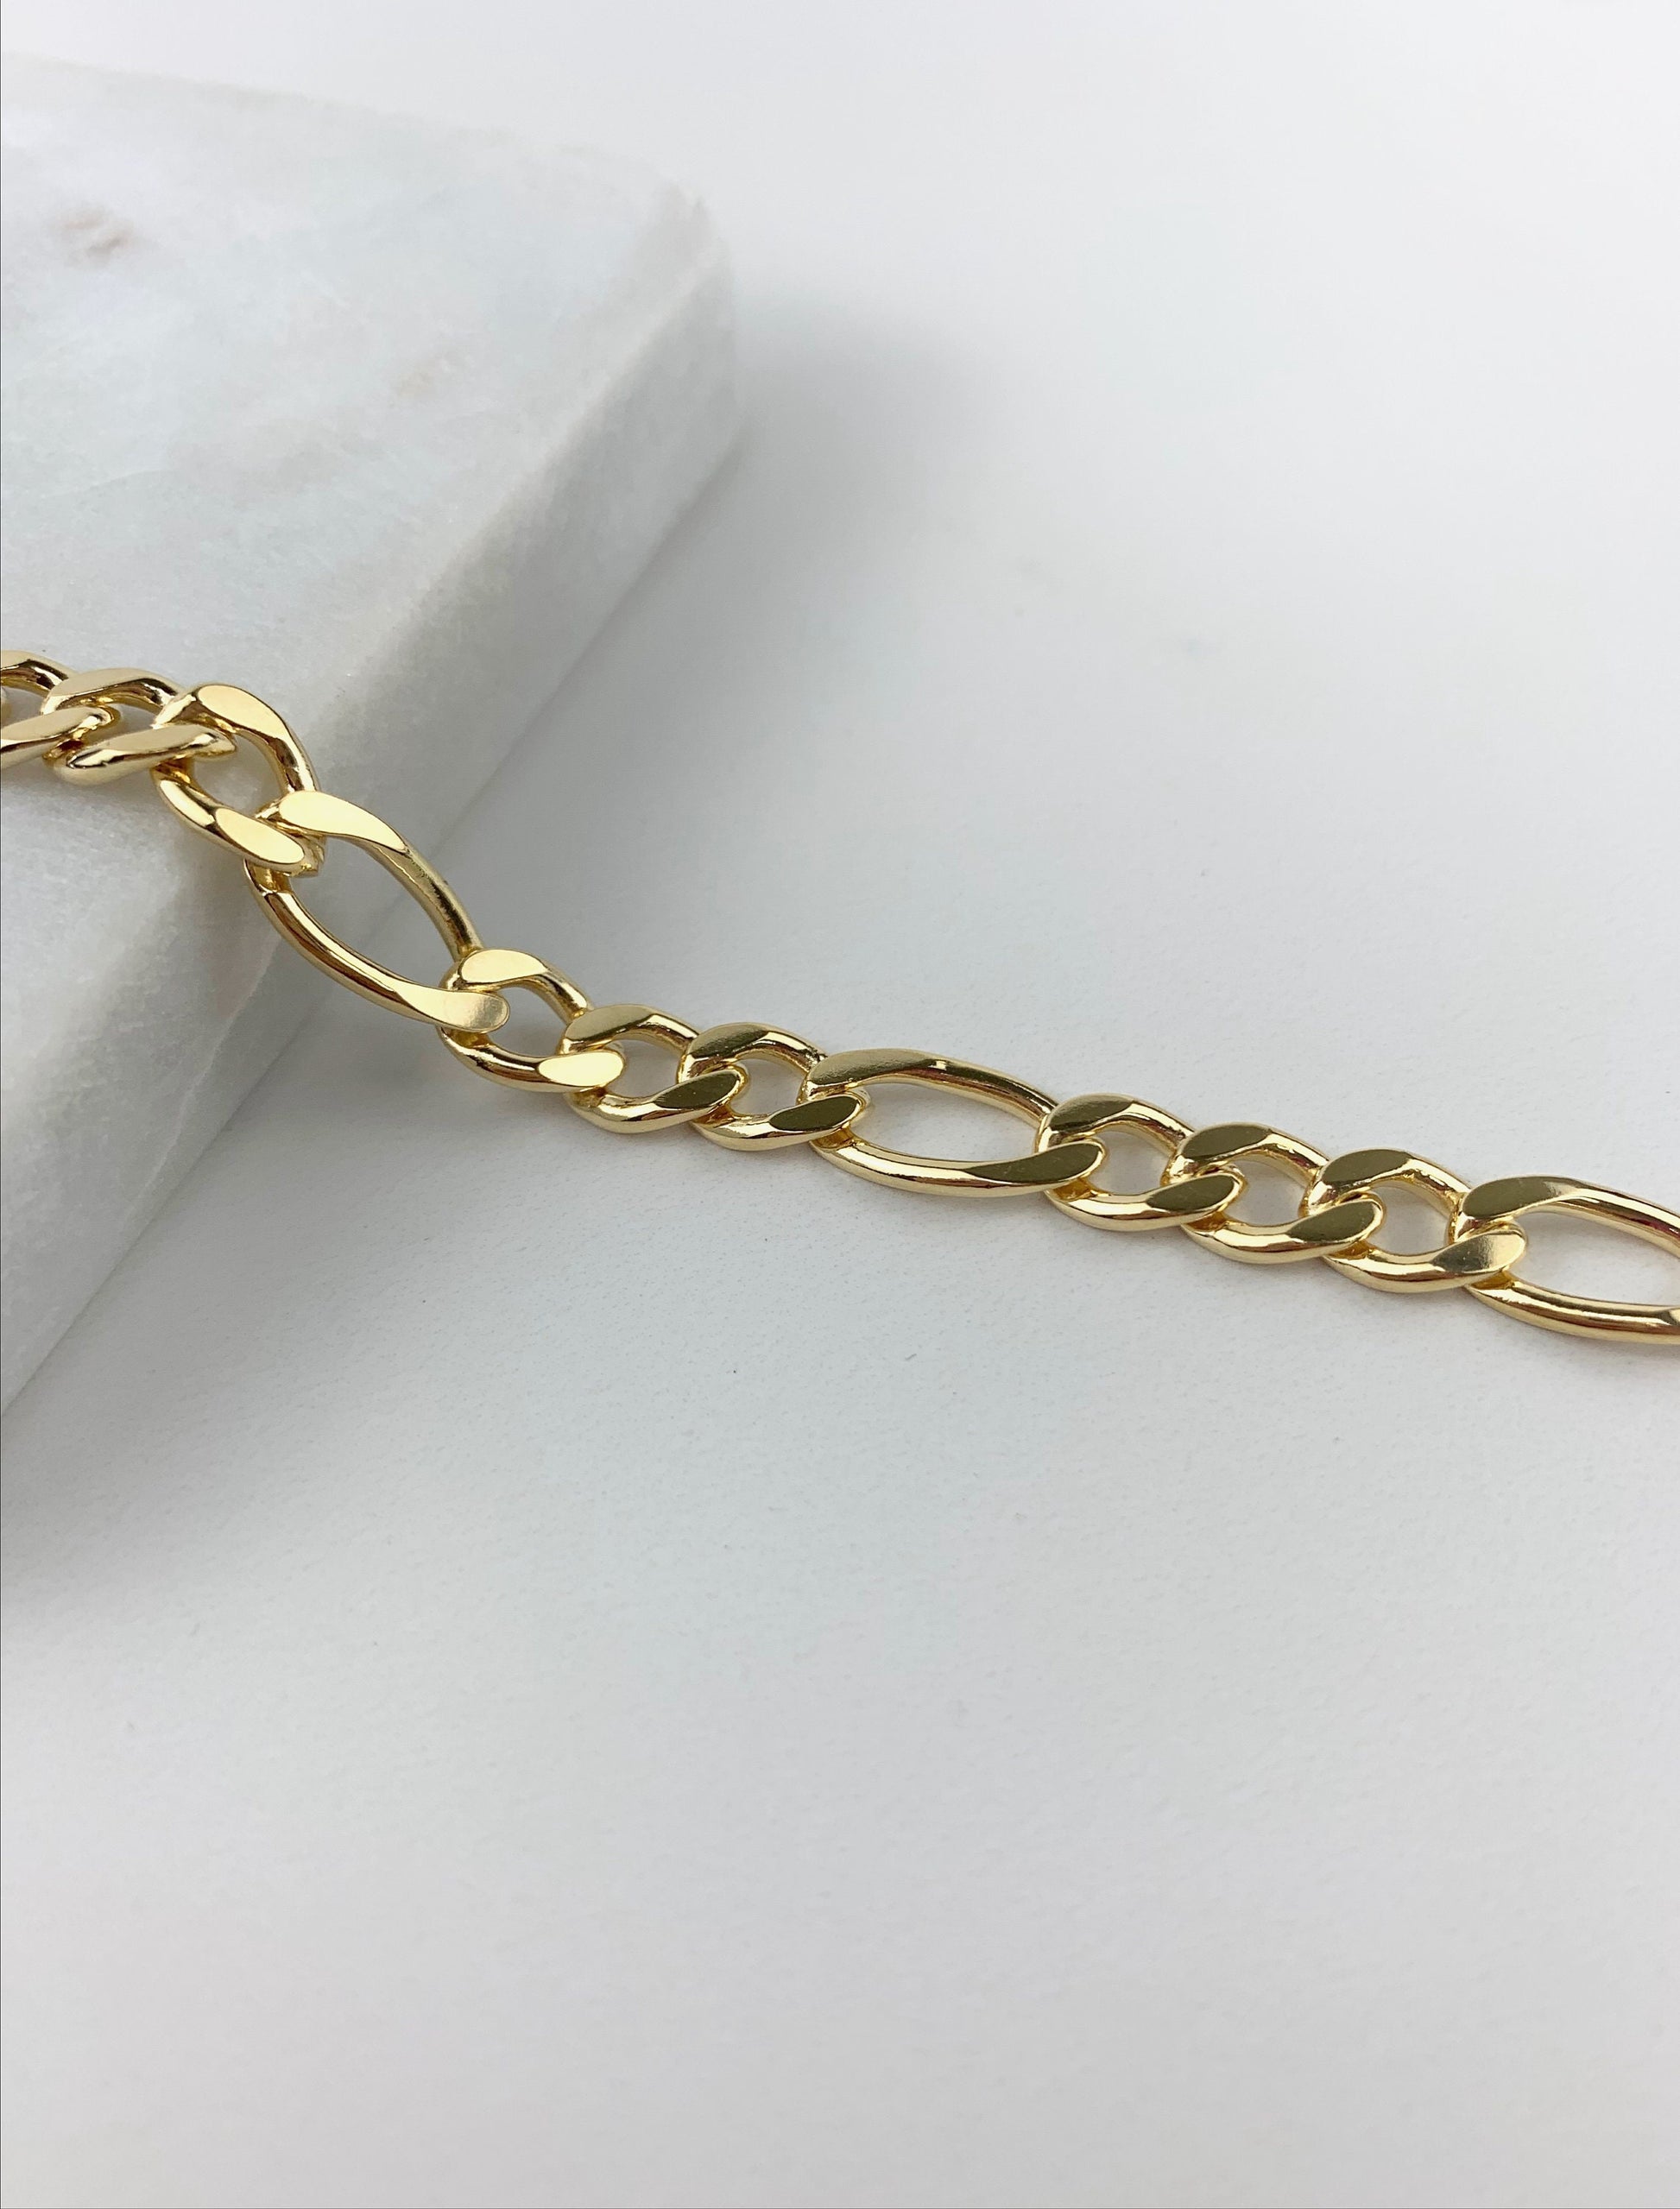 18k Gold Filled 4mm Figaro Link Anklet or Bracelet For Wholesale and Jewelry Supplies